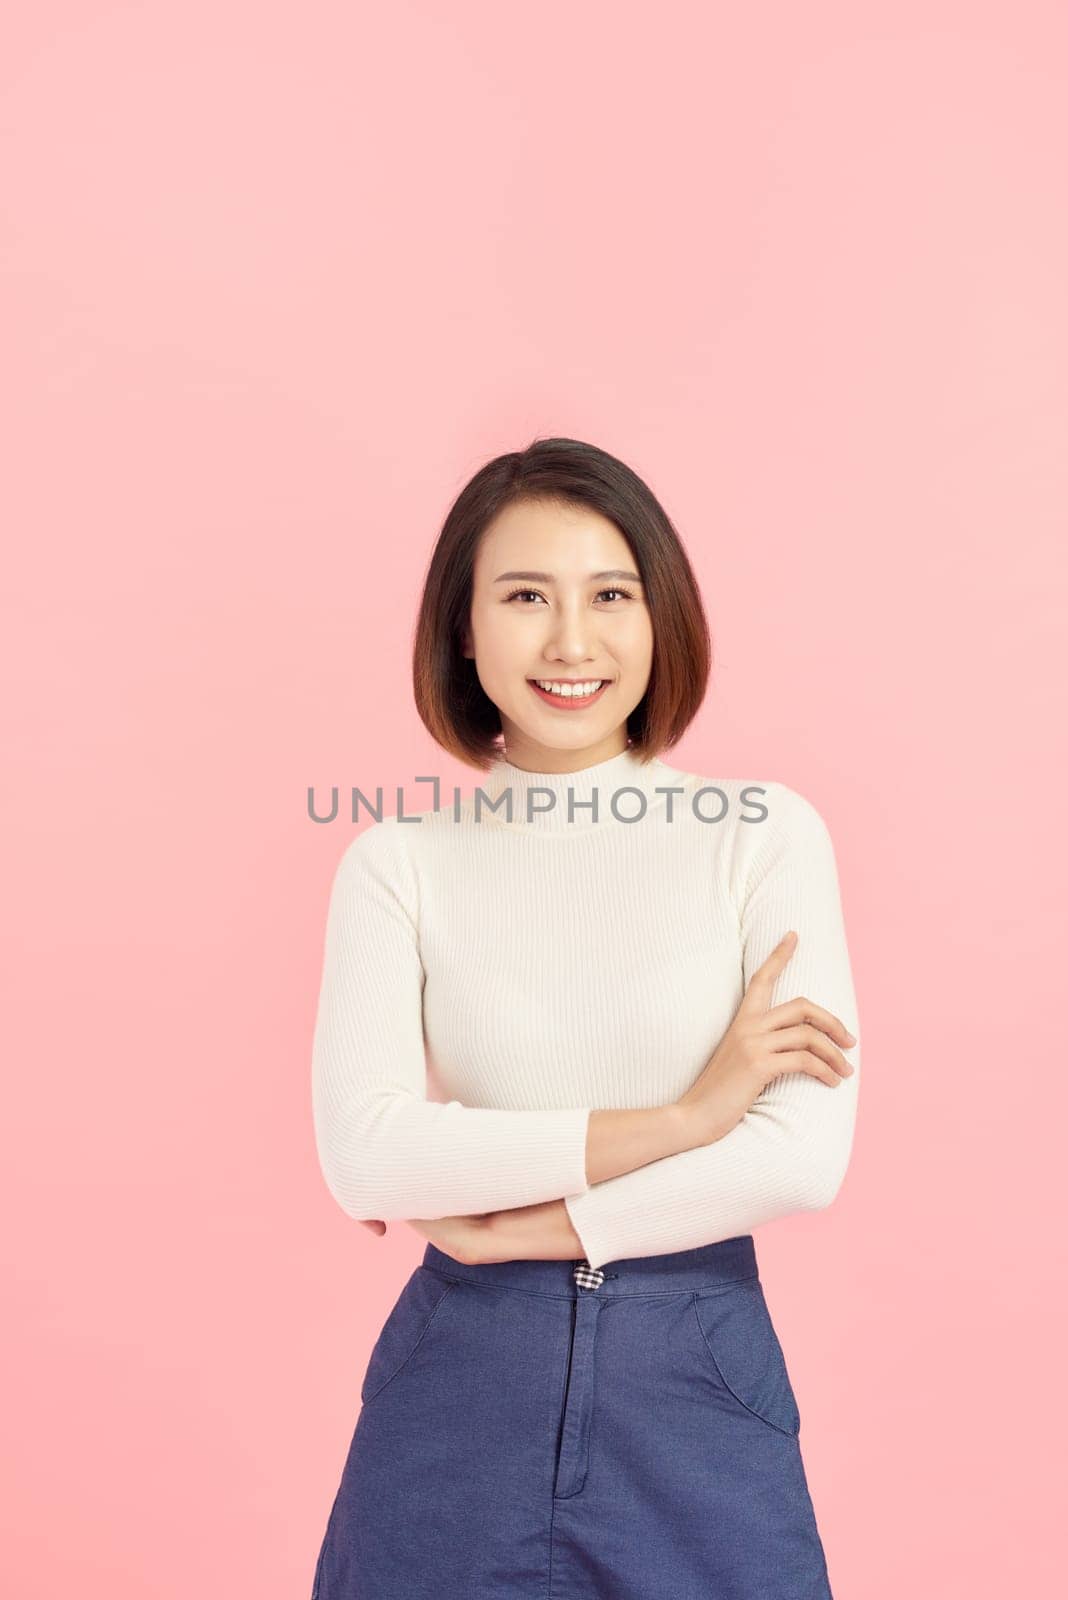 Young Asian woman wearing  sweater standing over isolated pink background happy face smiling with crossed arms looking at the camera. Positive person.